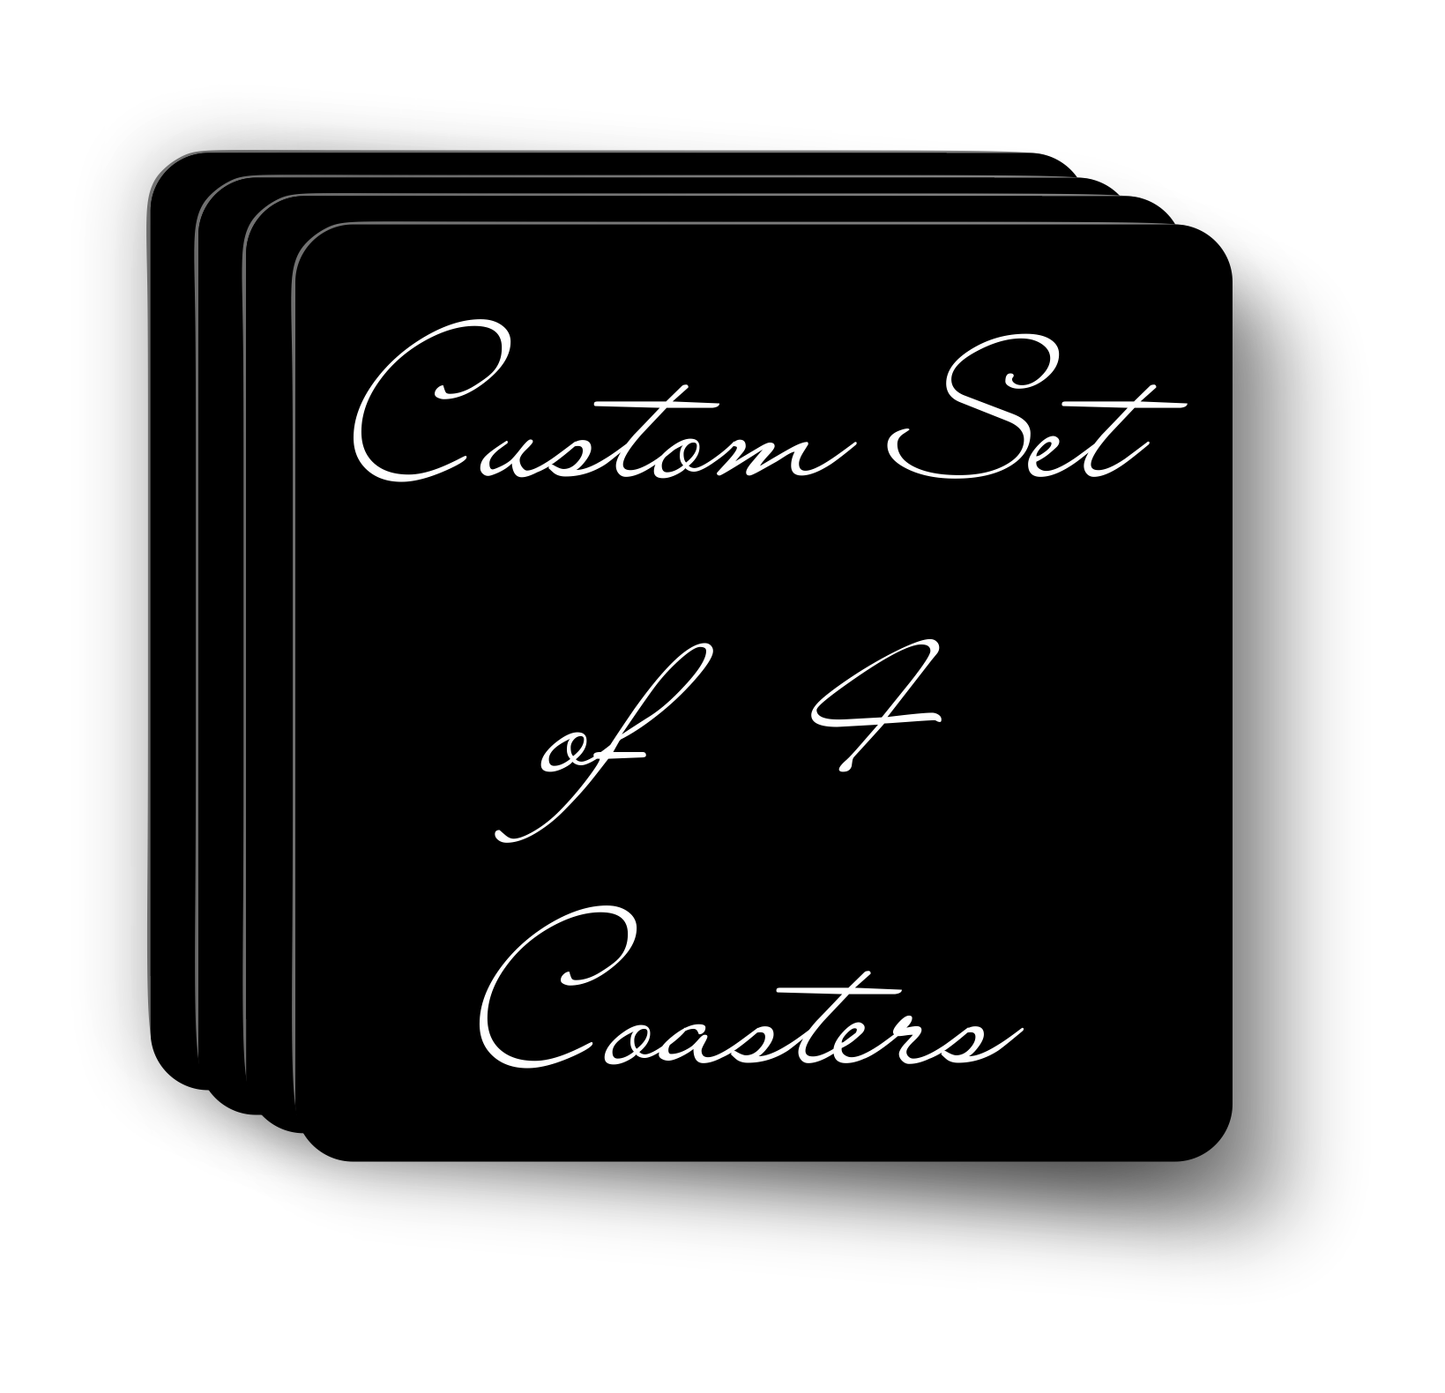 Custom Set of 4 Coasters of your Pets in Fractal Light Art Style.